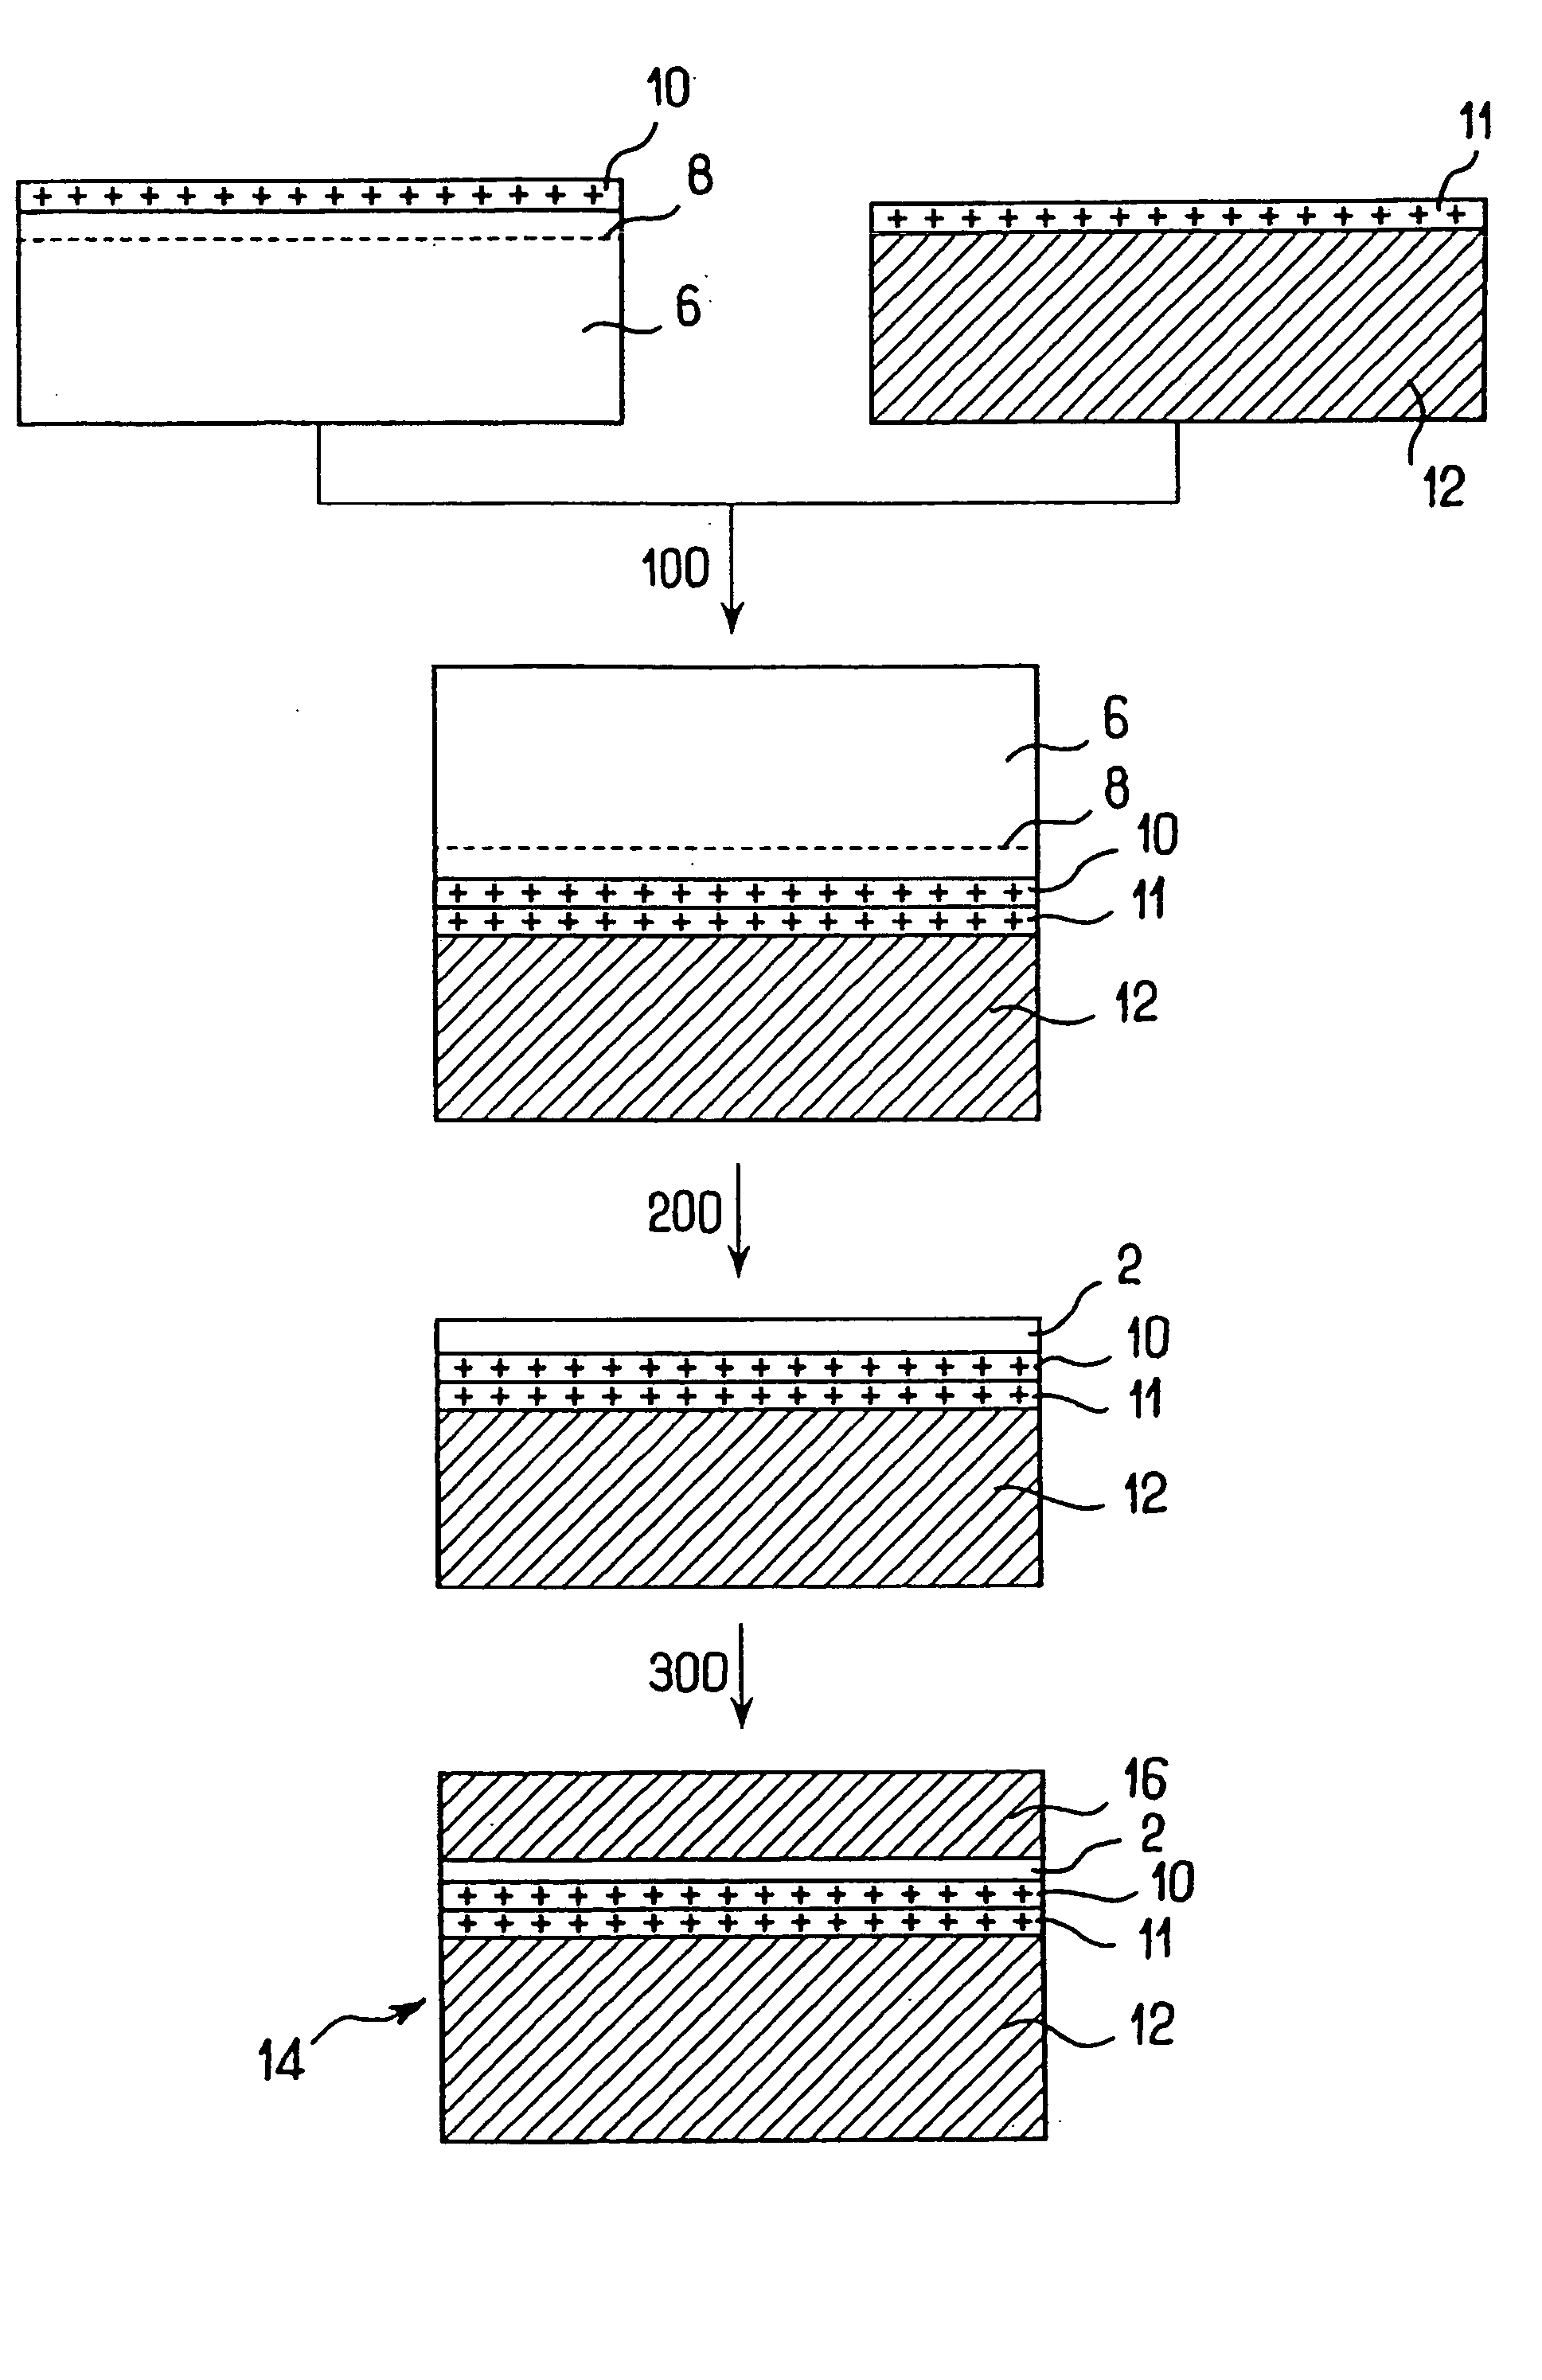 Methods for fabricating a substrate